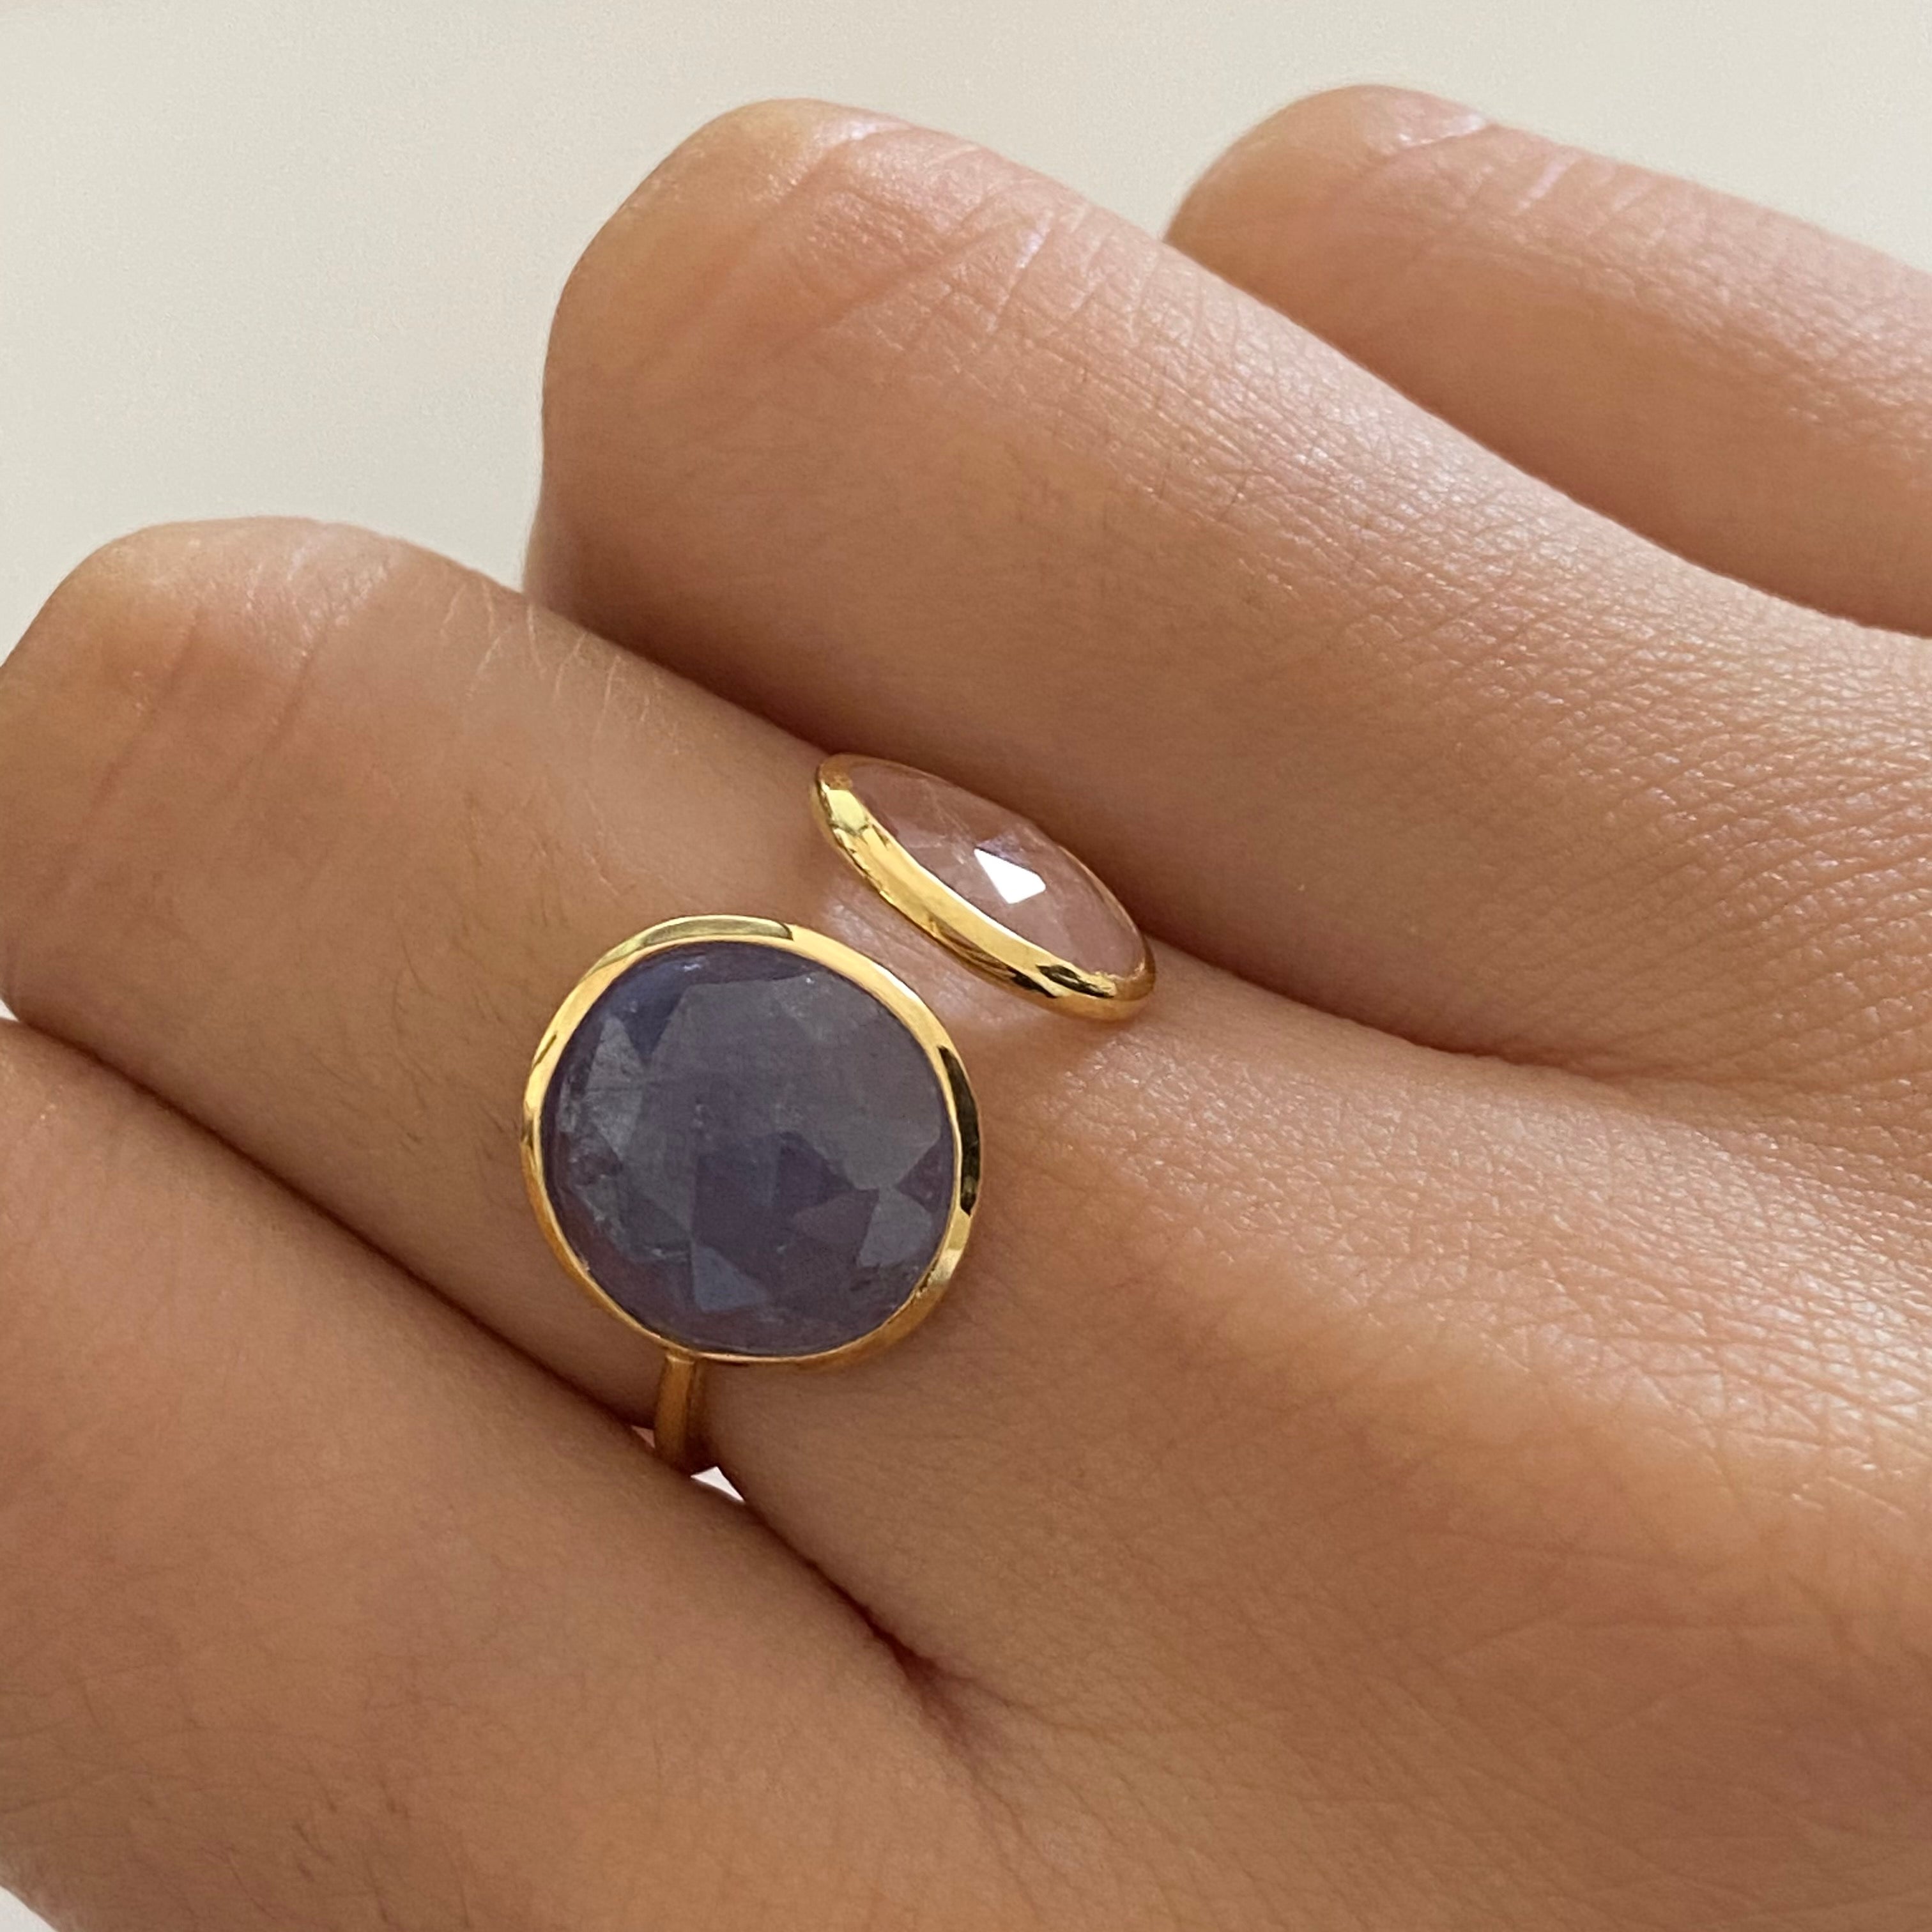 Gold Plated Sterling Silver Two Gemstone Ring with Morganite and Tanzanite